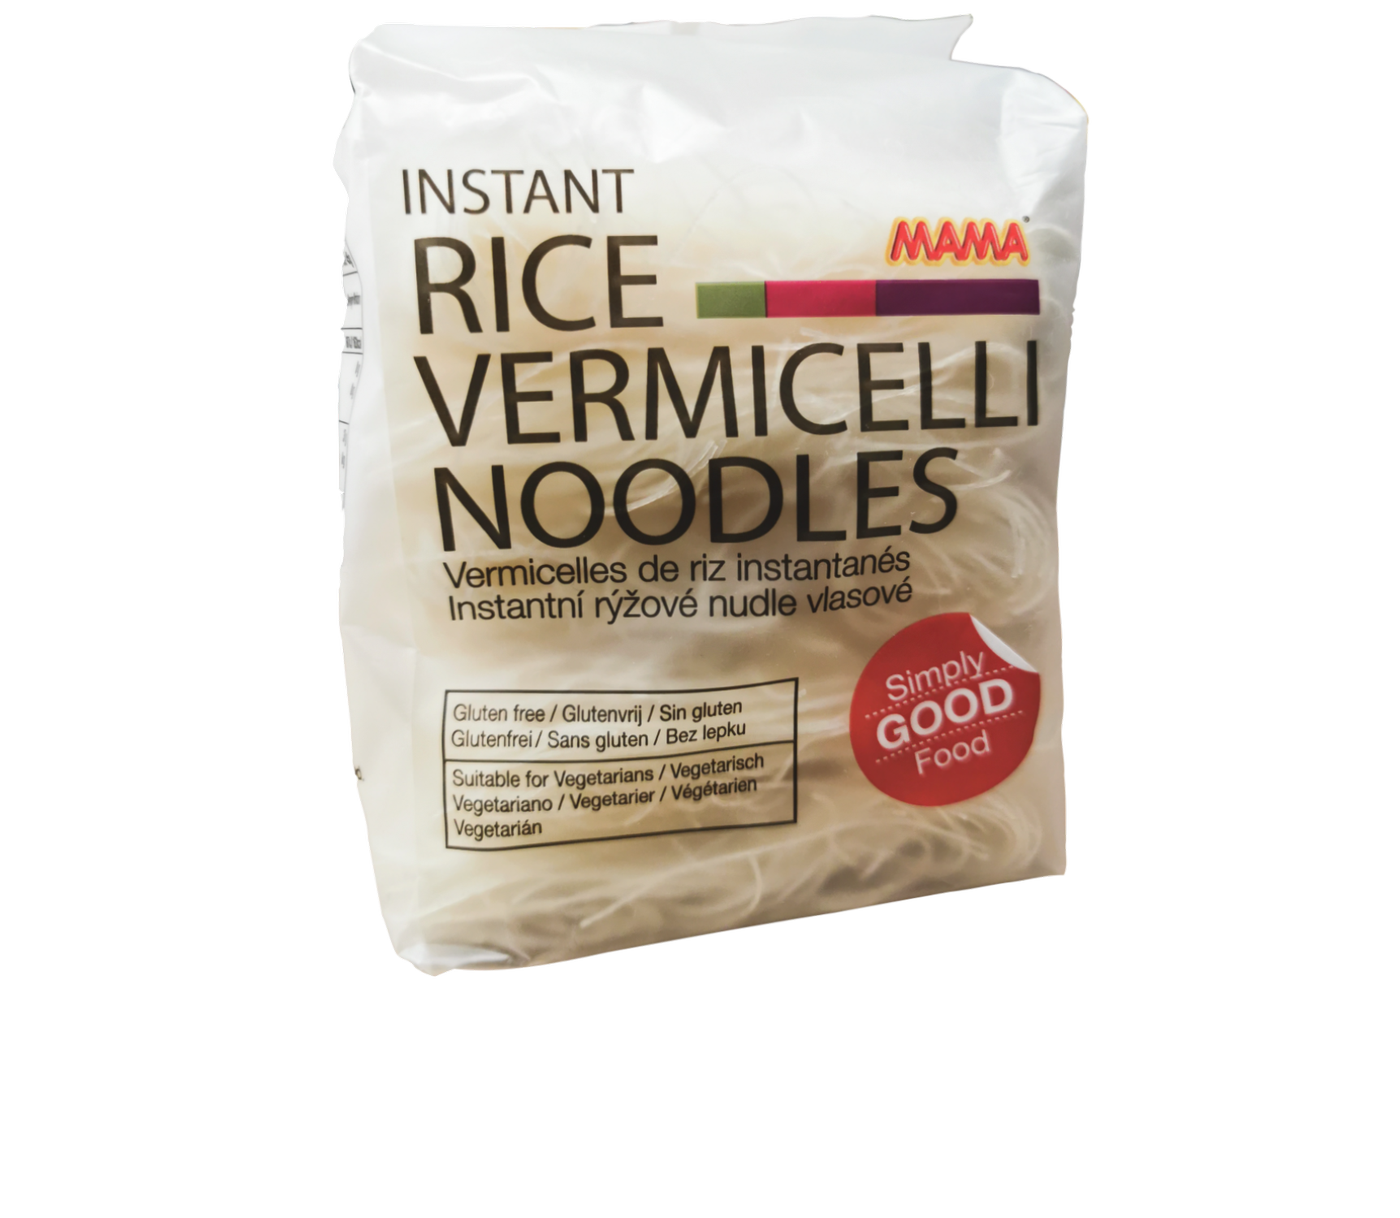 Mama Instant Rice Vermicelli Noodles